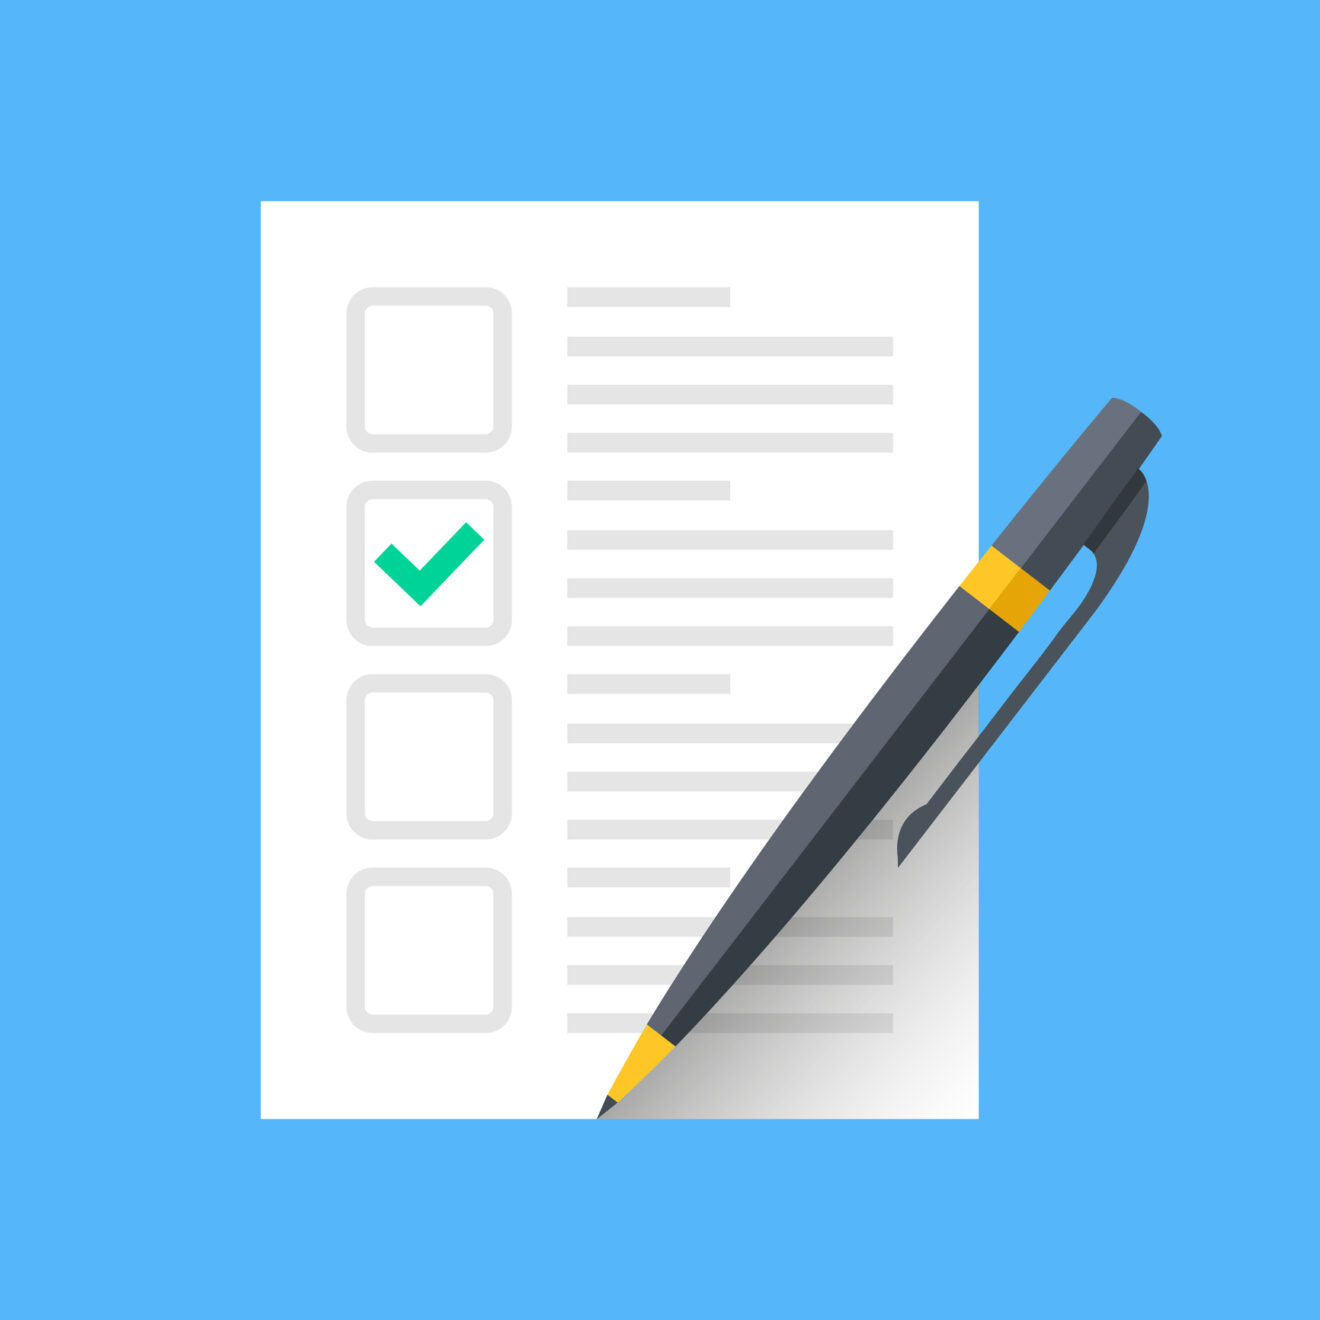 Document with green check mark and pen. Checklist and single tick icon. Green checkmark. Claim form, fill application form, survey, voting concepts. Modern flat design graphic elements. Vector icon